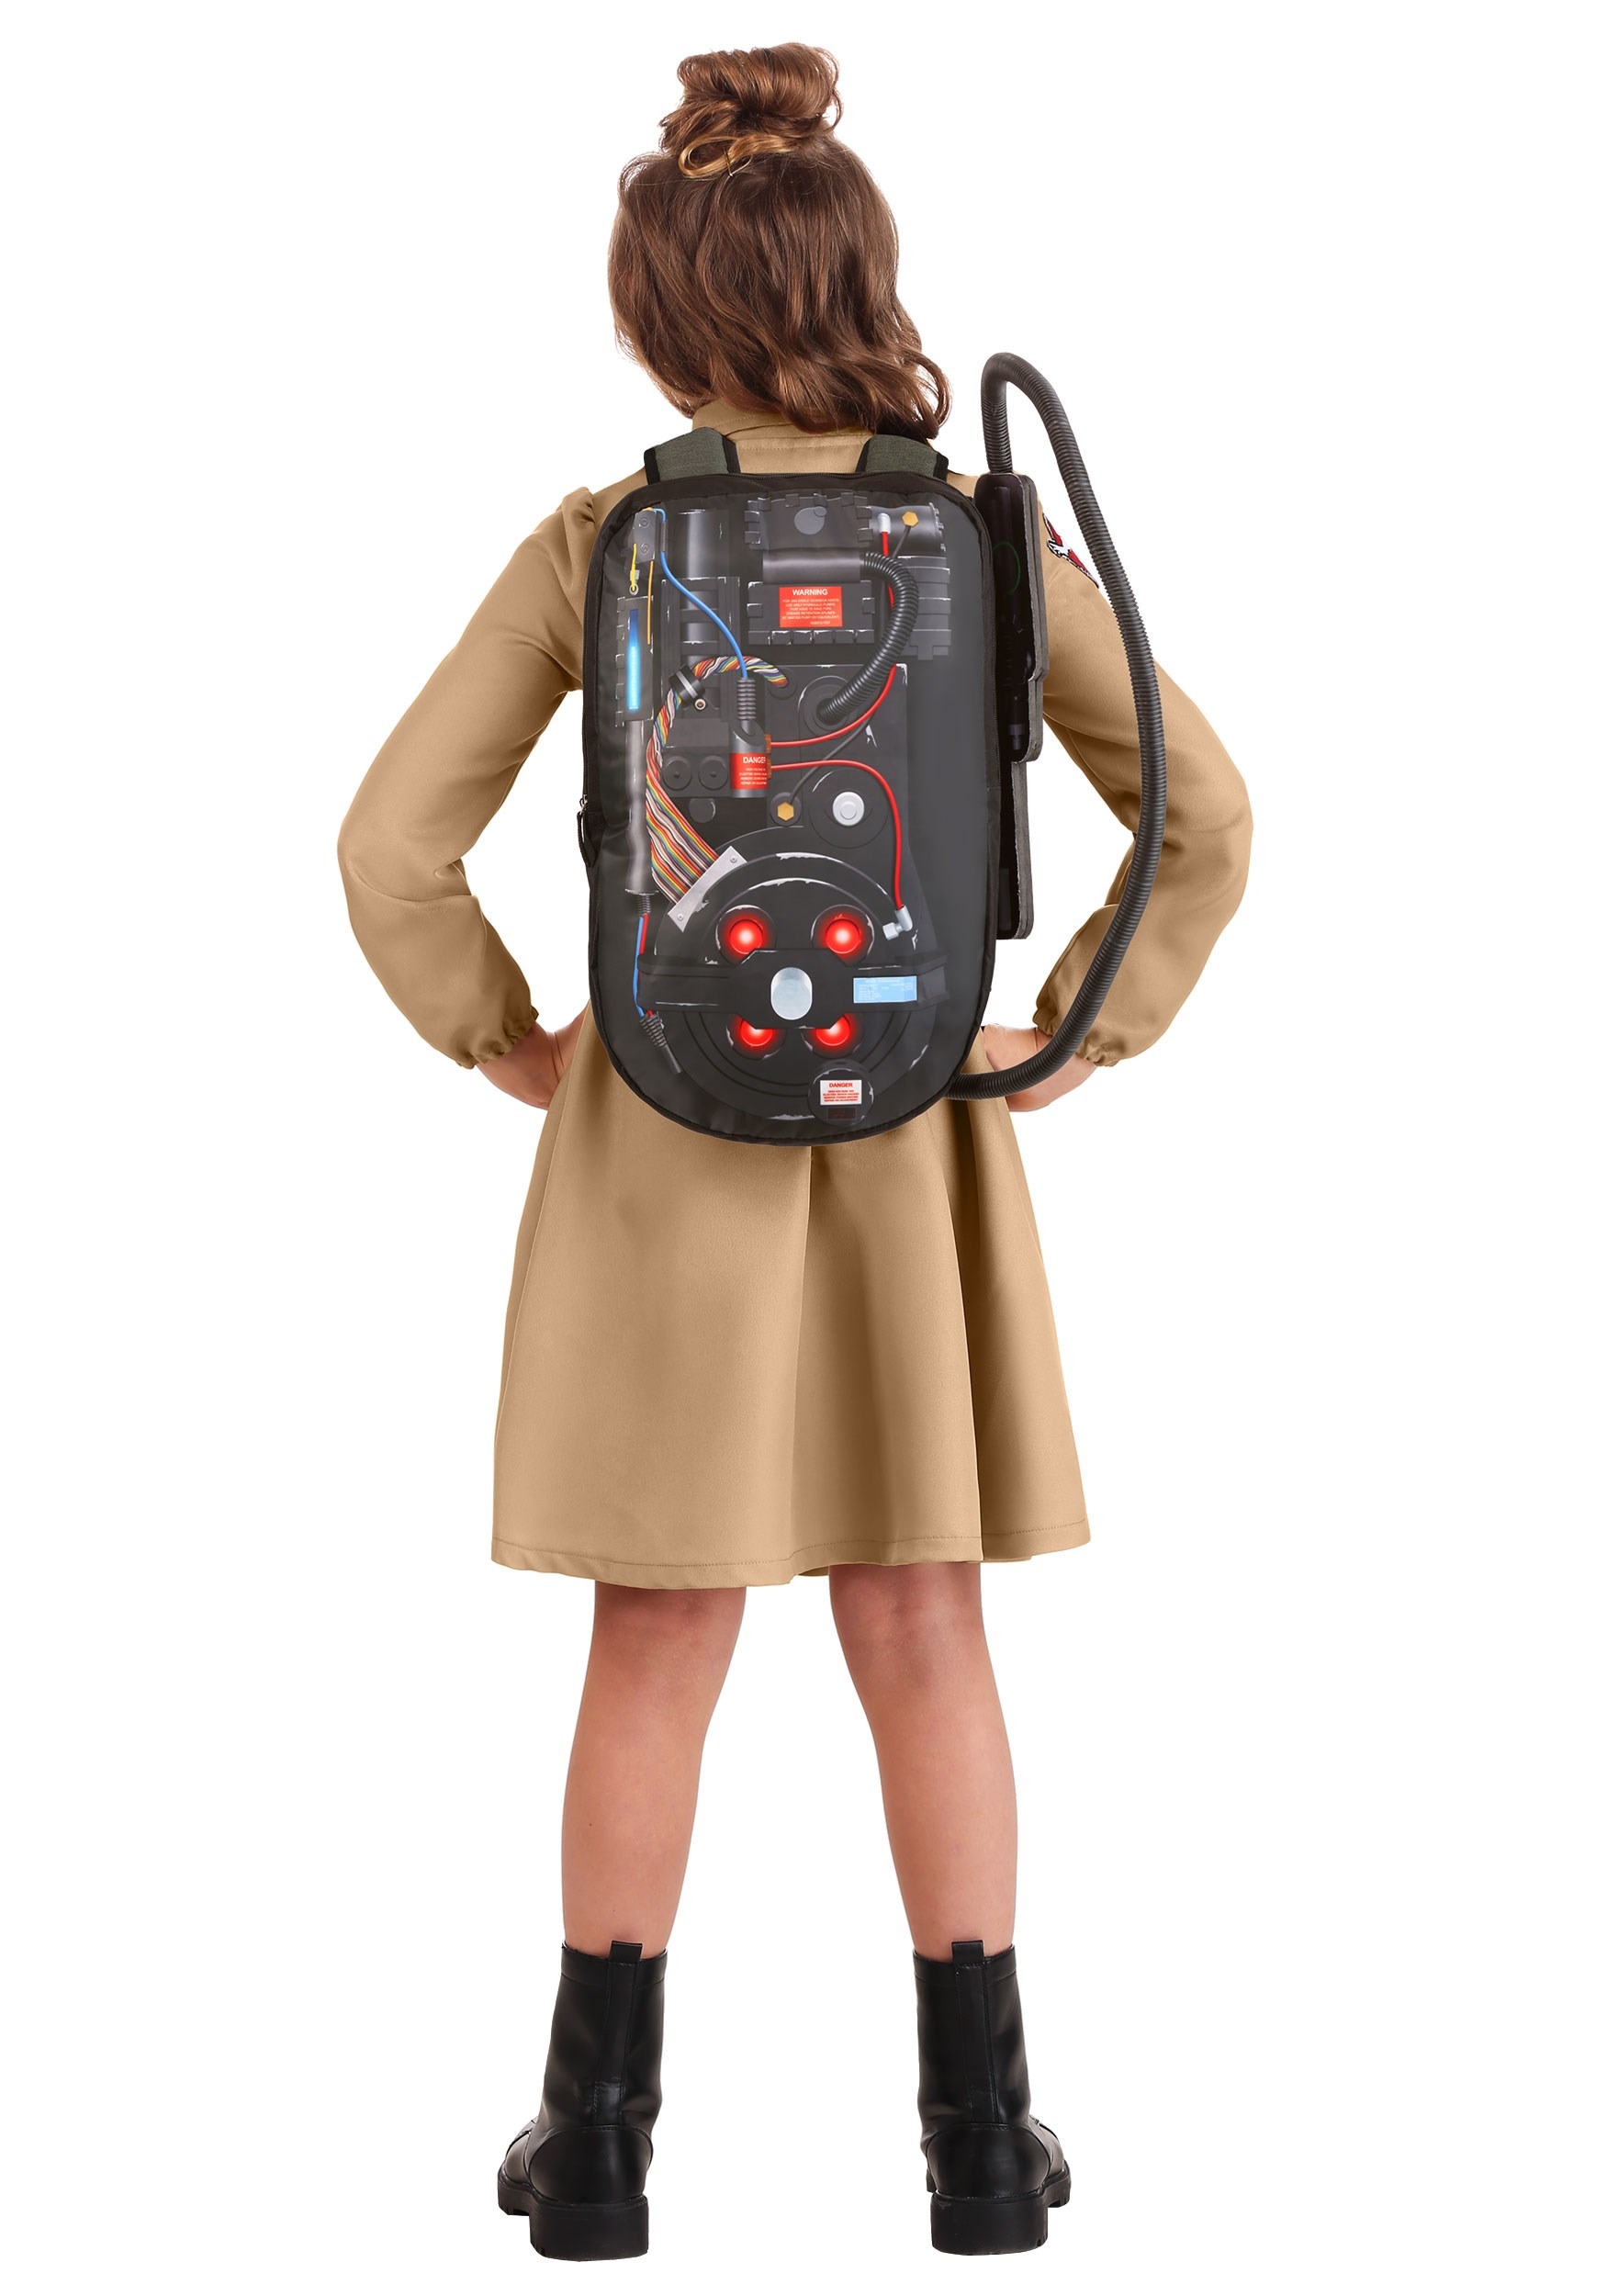 Ghostbusters Costume Dress For Girls